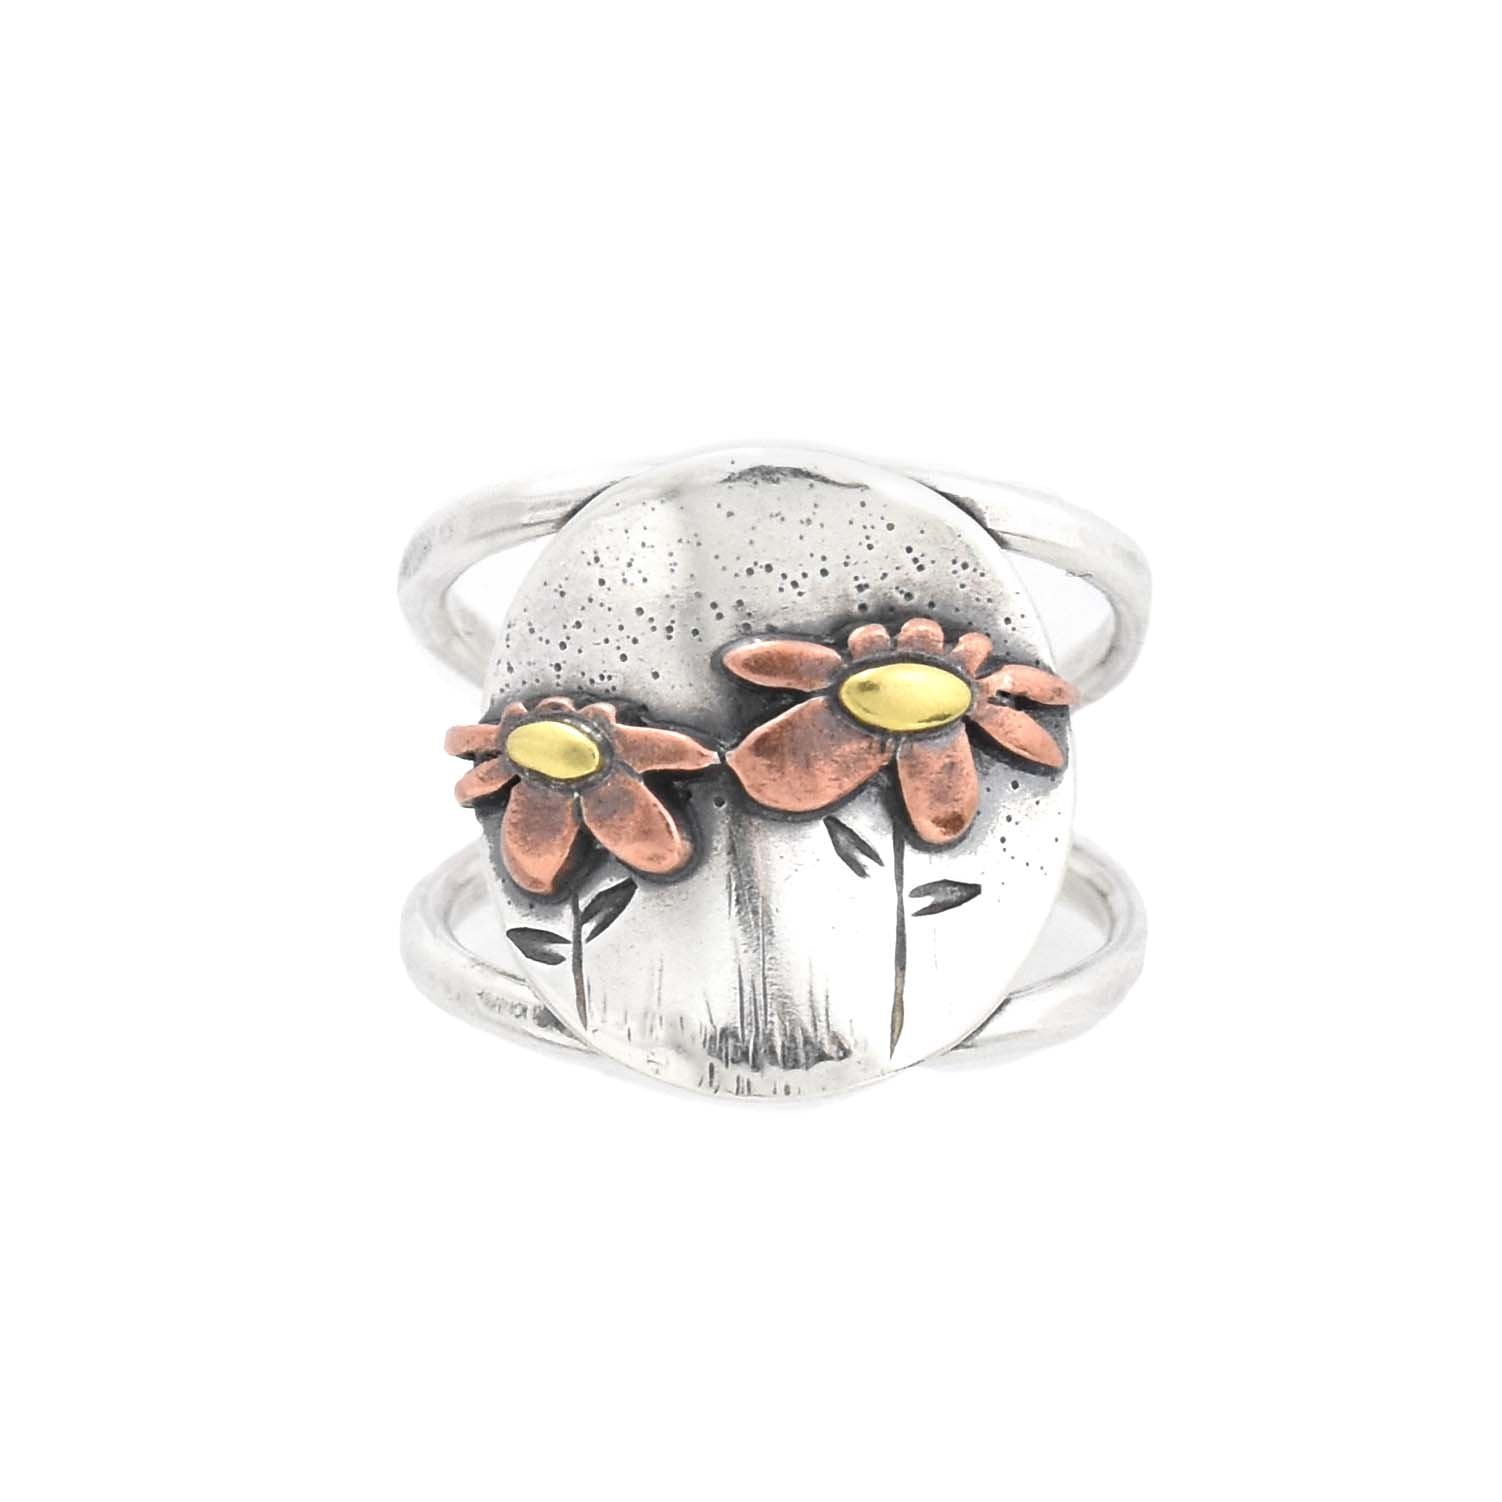 Wildflower Ring - Ring  Select Size  4 4013 - handmade by Beth Millner Jewelry